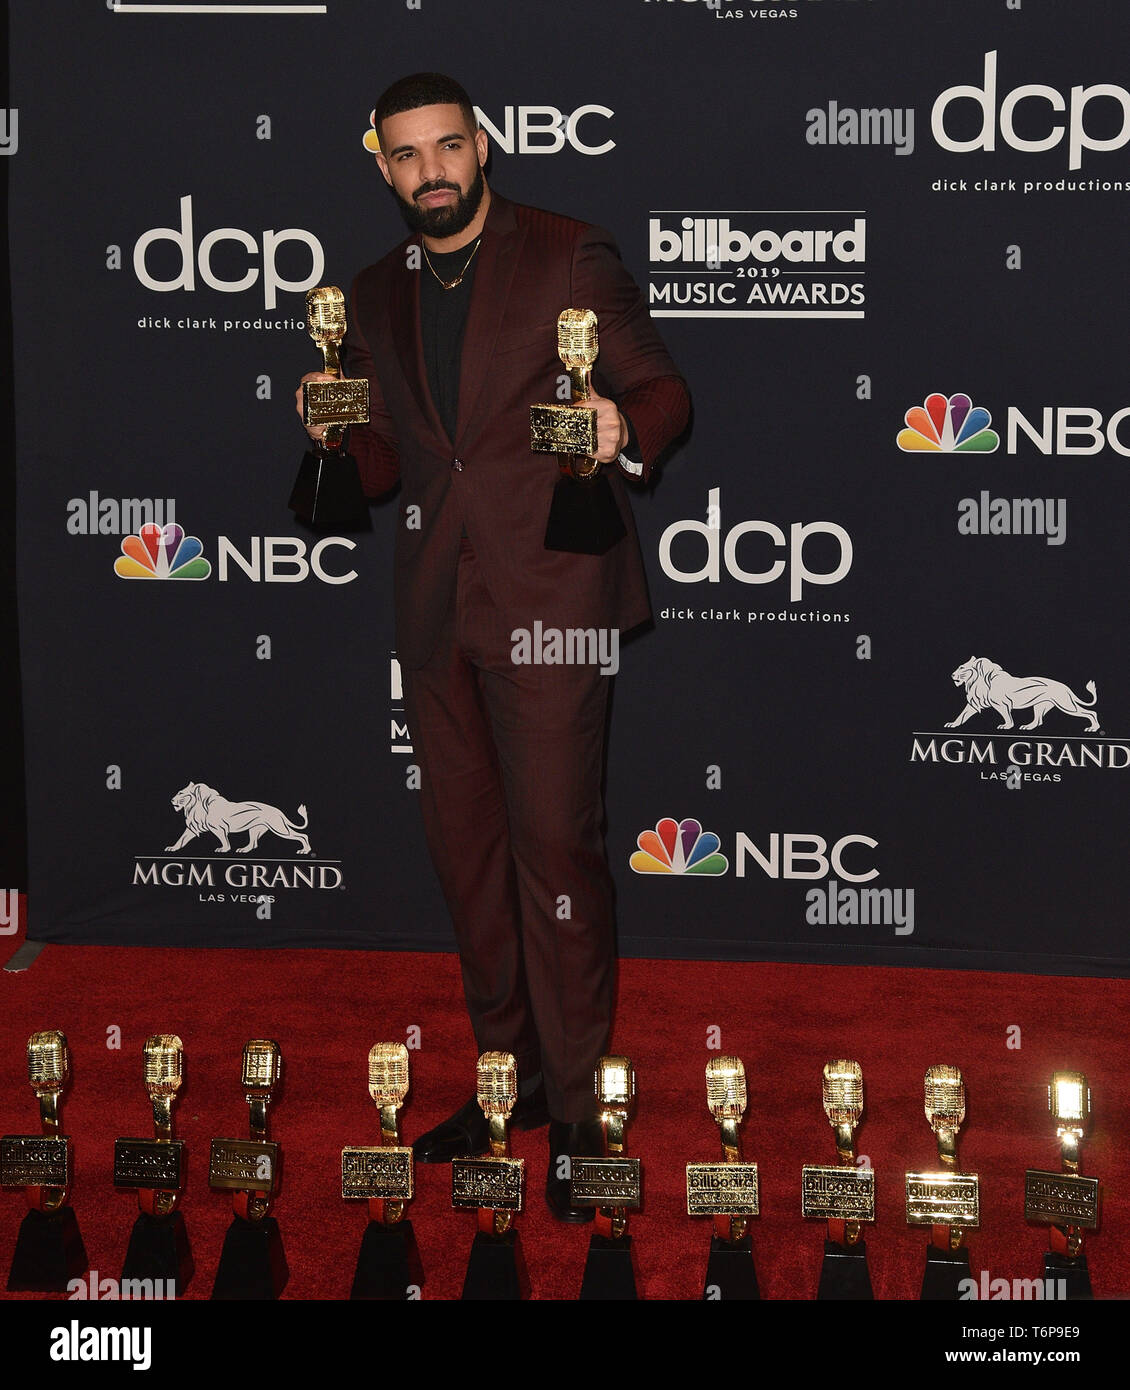 Las Vegas, NV, USA. 1st May, 2019. Drake poses with the awards for Top Artist, Top Male Artist, Top Billboard 200 Album for “Scorpion”, Top Billboard 200 Artist, Top Hot 100 Artist, Top Streaming Songs Artist, Top Song Sales Artist, Top Rap Artist, Top Rap Male Artist in the press room during the 2019 Billboard Music Awards at MGM Grand Garden Arena on May 01, 2019 in Las Vegas, Nevada. Photo: imageSPACE/MediaPunch/Alamy Live News Stock Photo